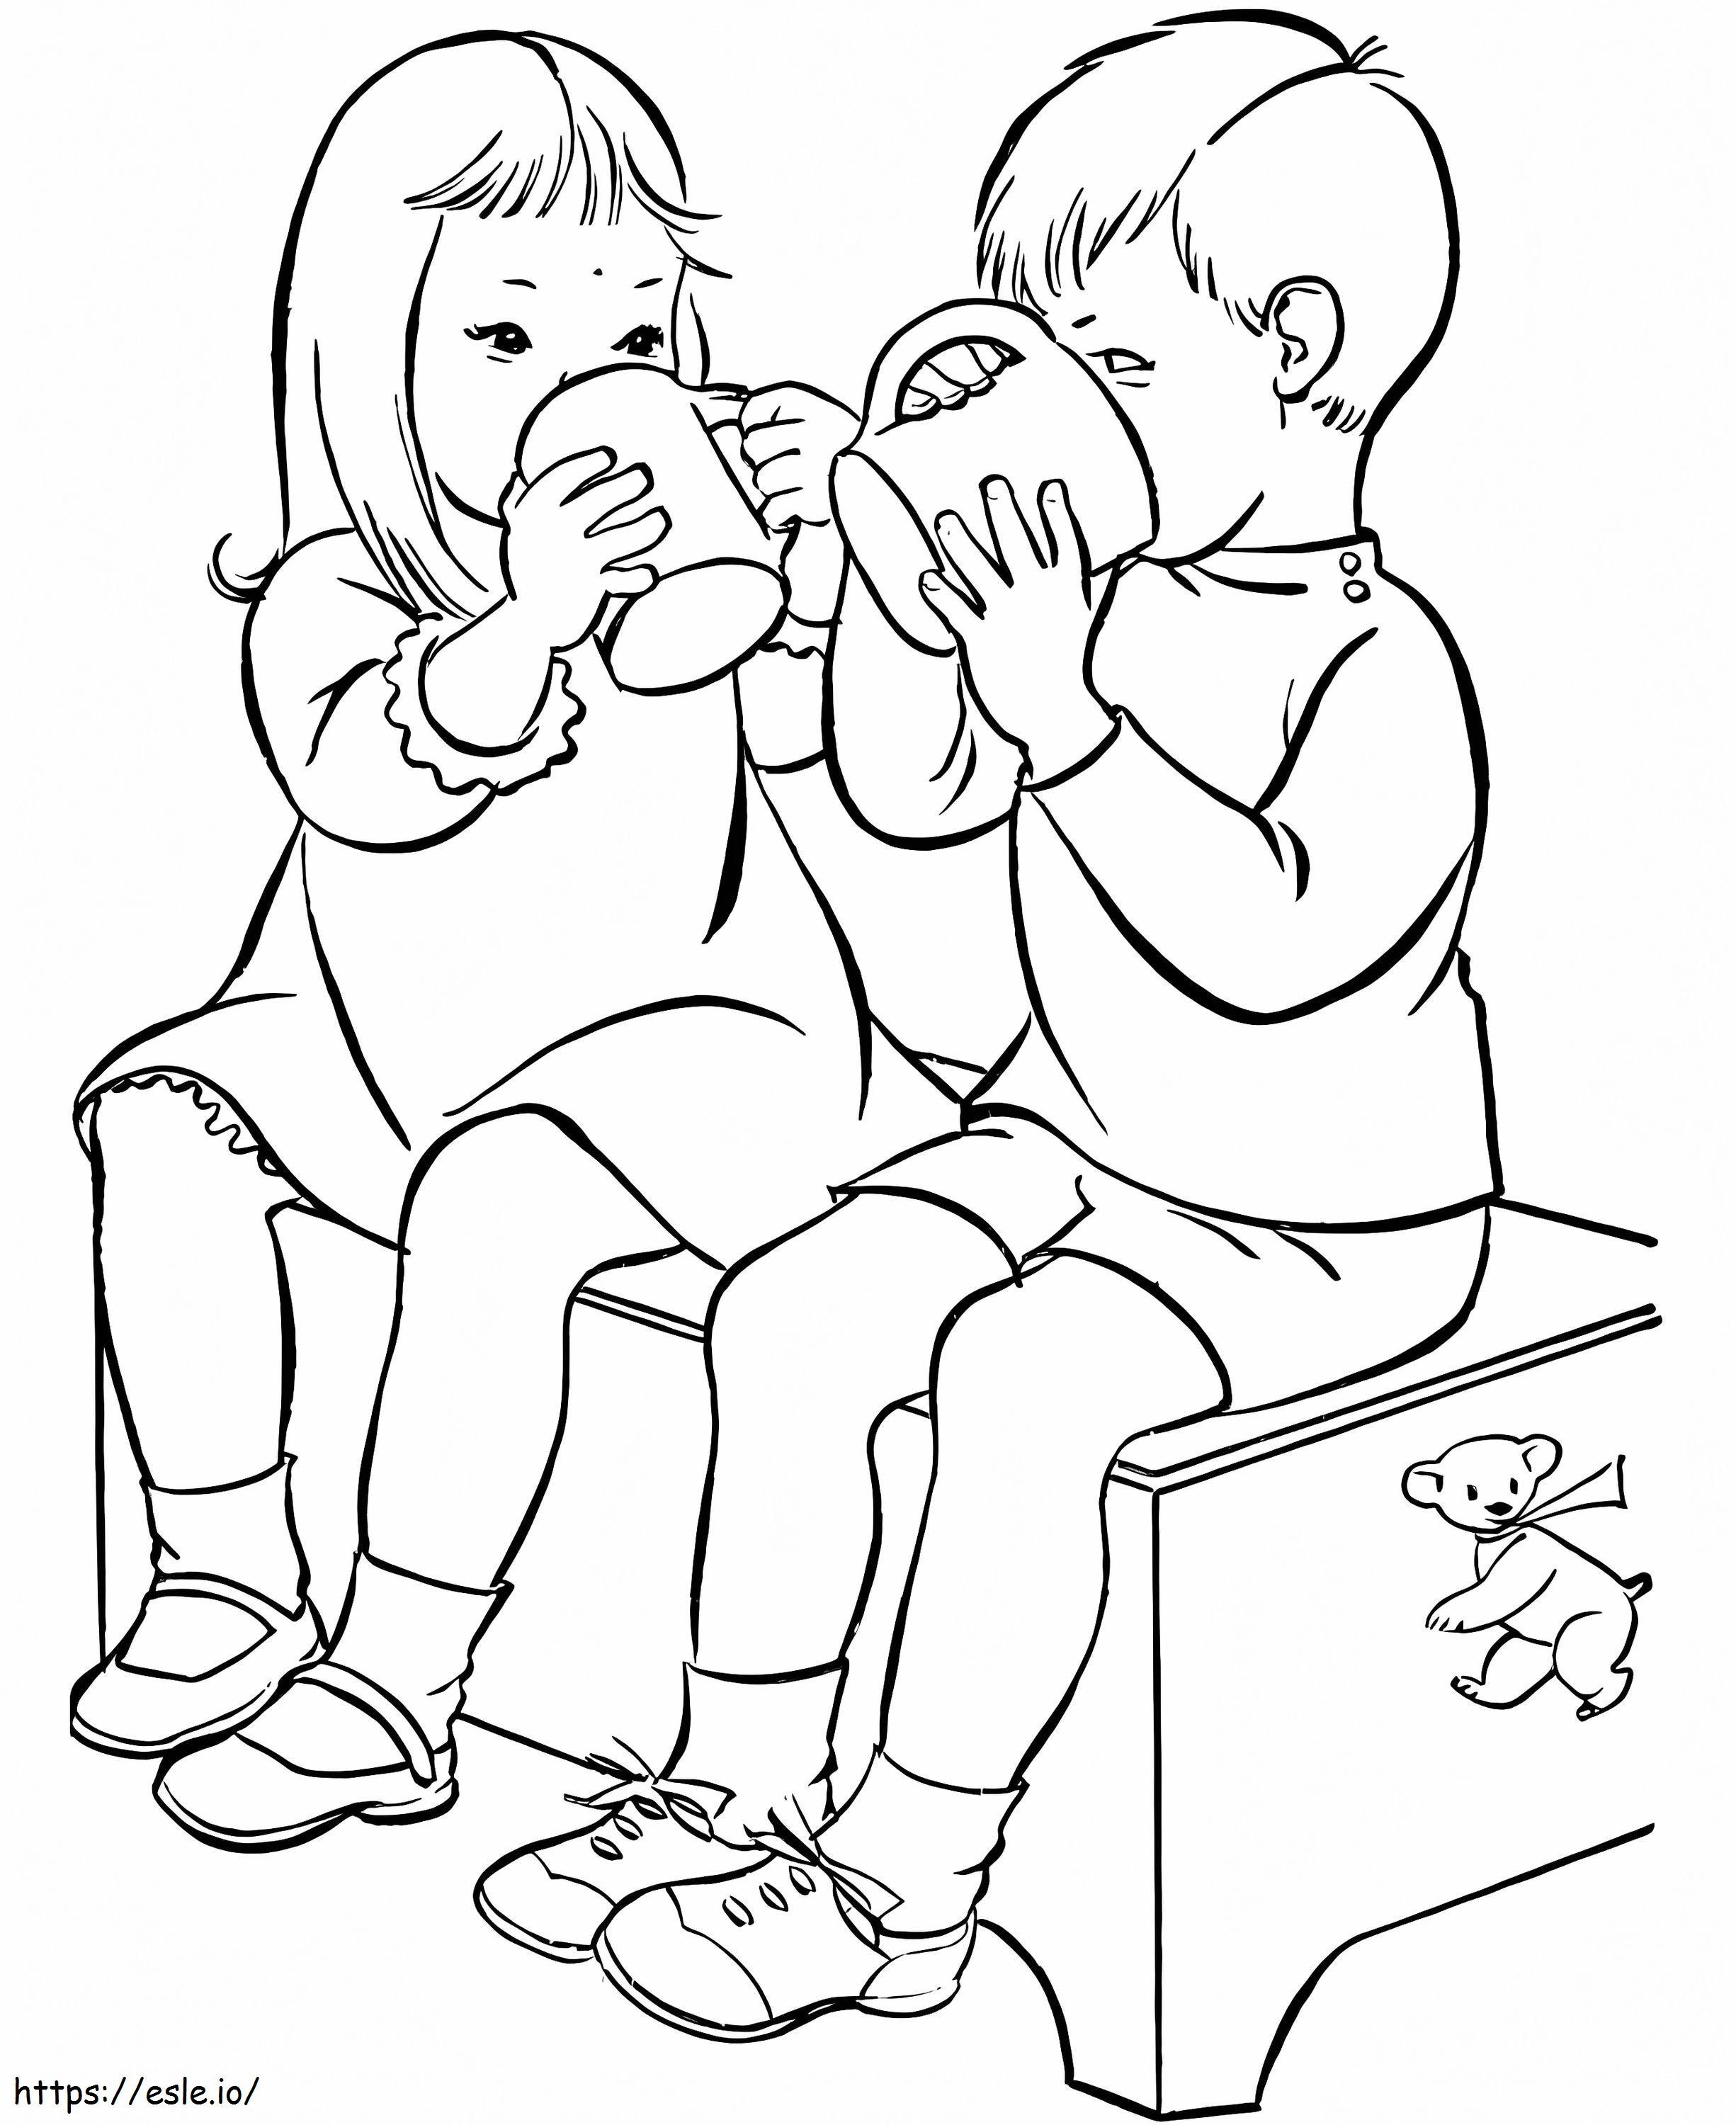 Friendship 3 coloring page